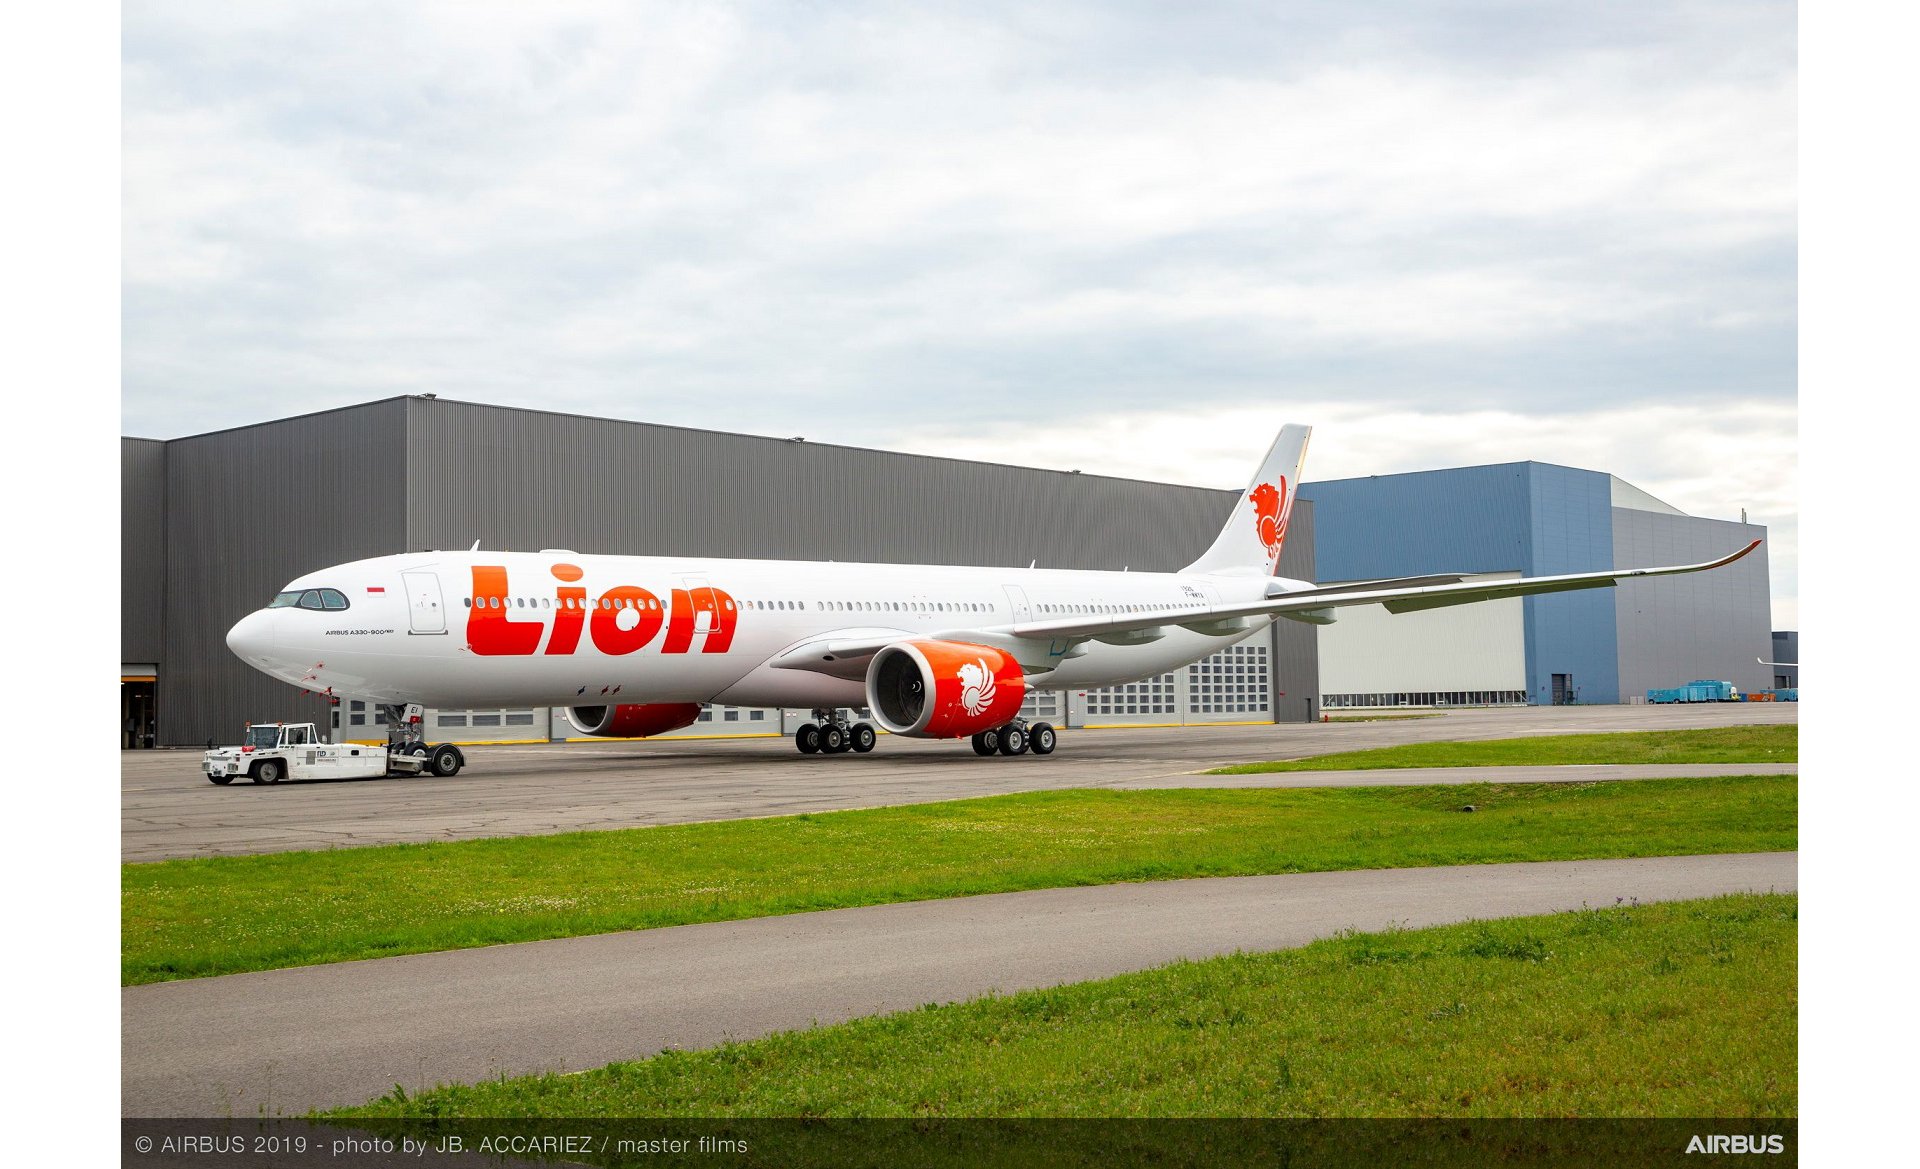 https://airbus-h.assetsadobe2.com/is/image/content/dam/products-and-solutions/commercial-aircraft/a330-family/a330-900neo/Lion_Air_A330-900_RollOut.jpg?wid=1920&fit=fit,1&qlt=85,0